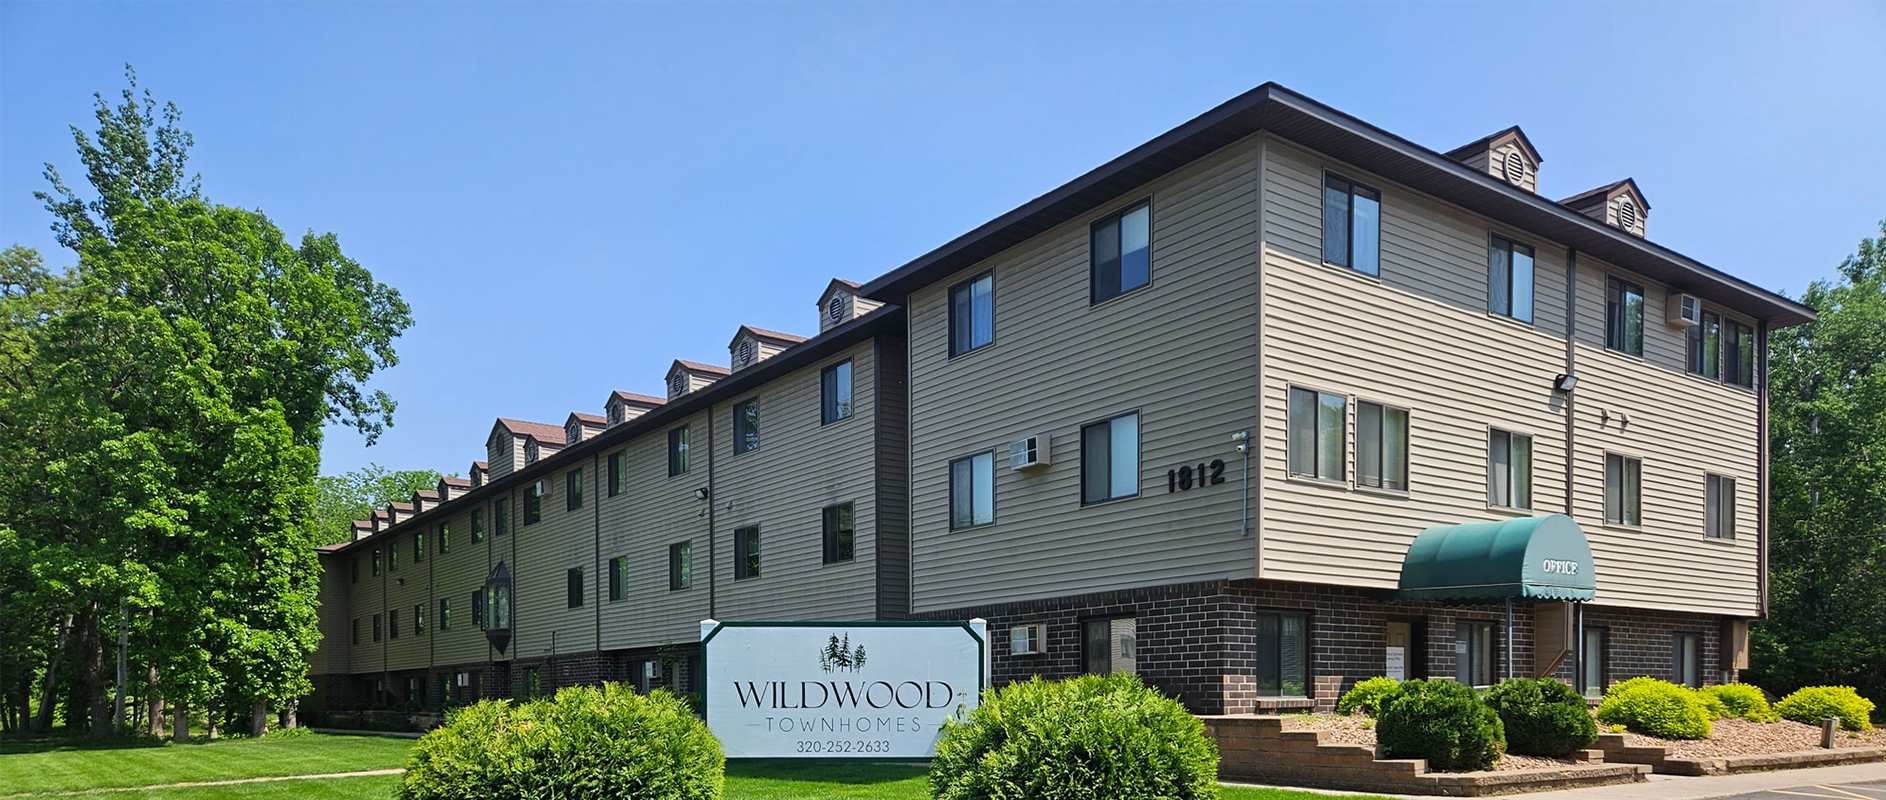 Wild Wood Townhomes exterior view